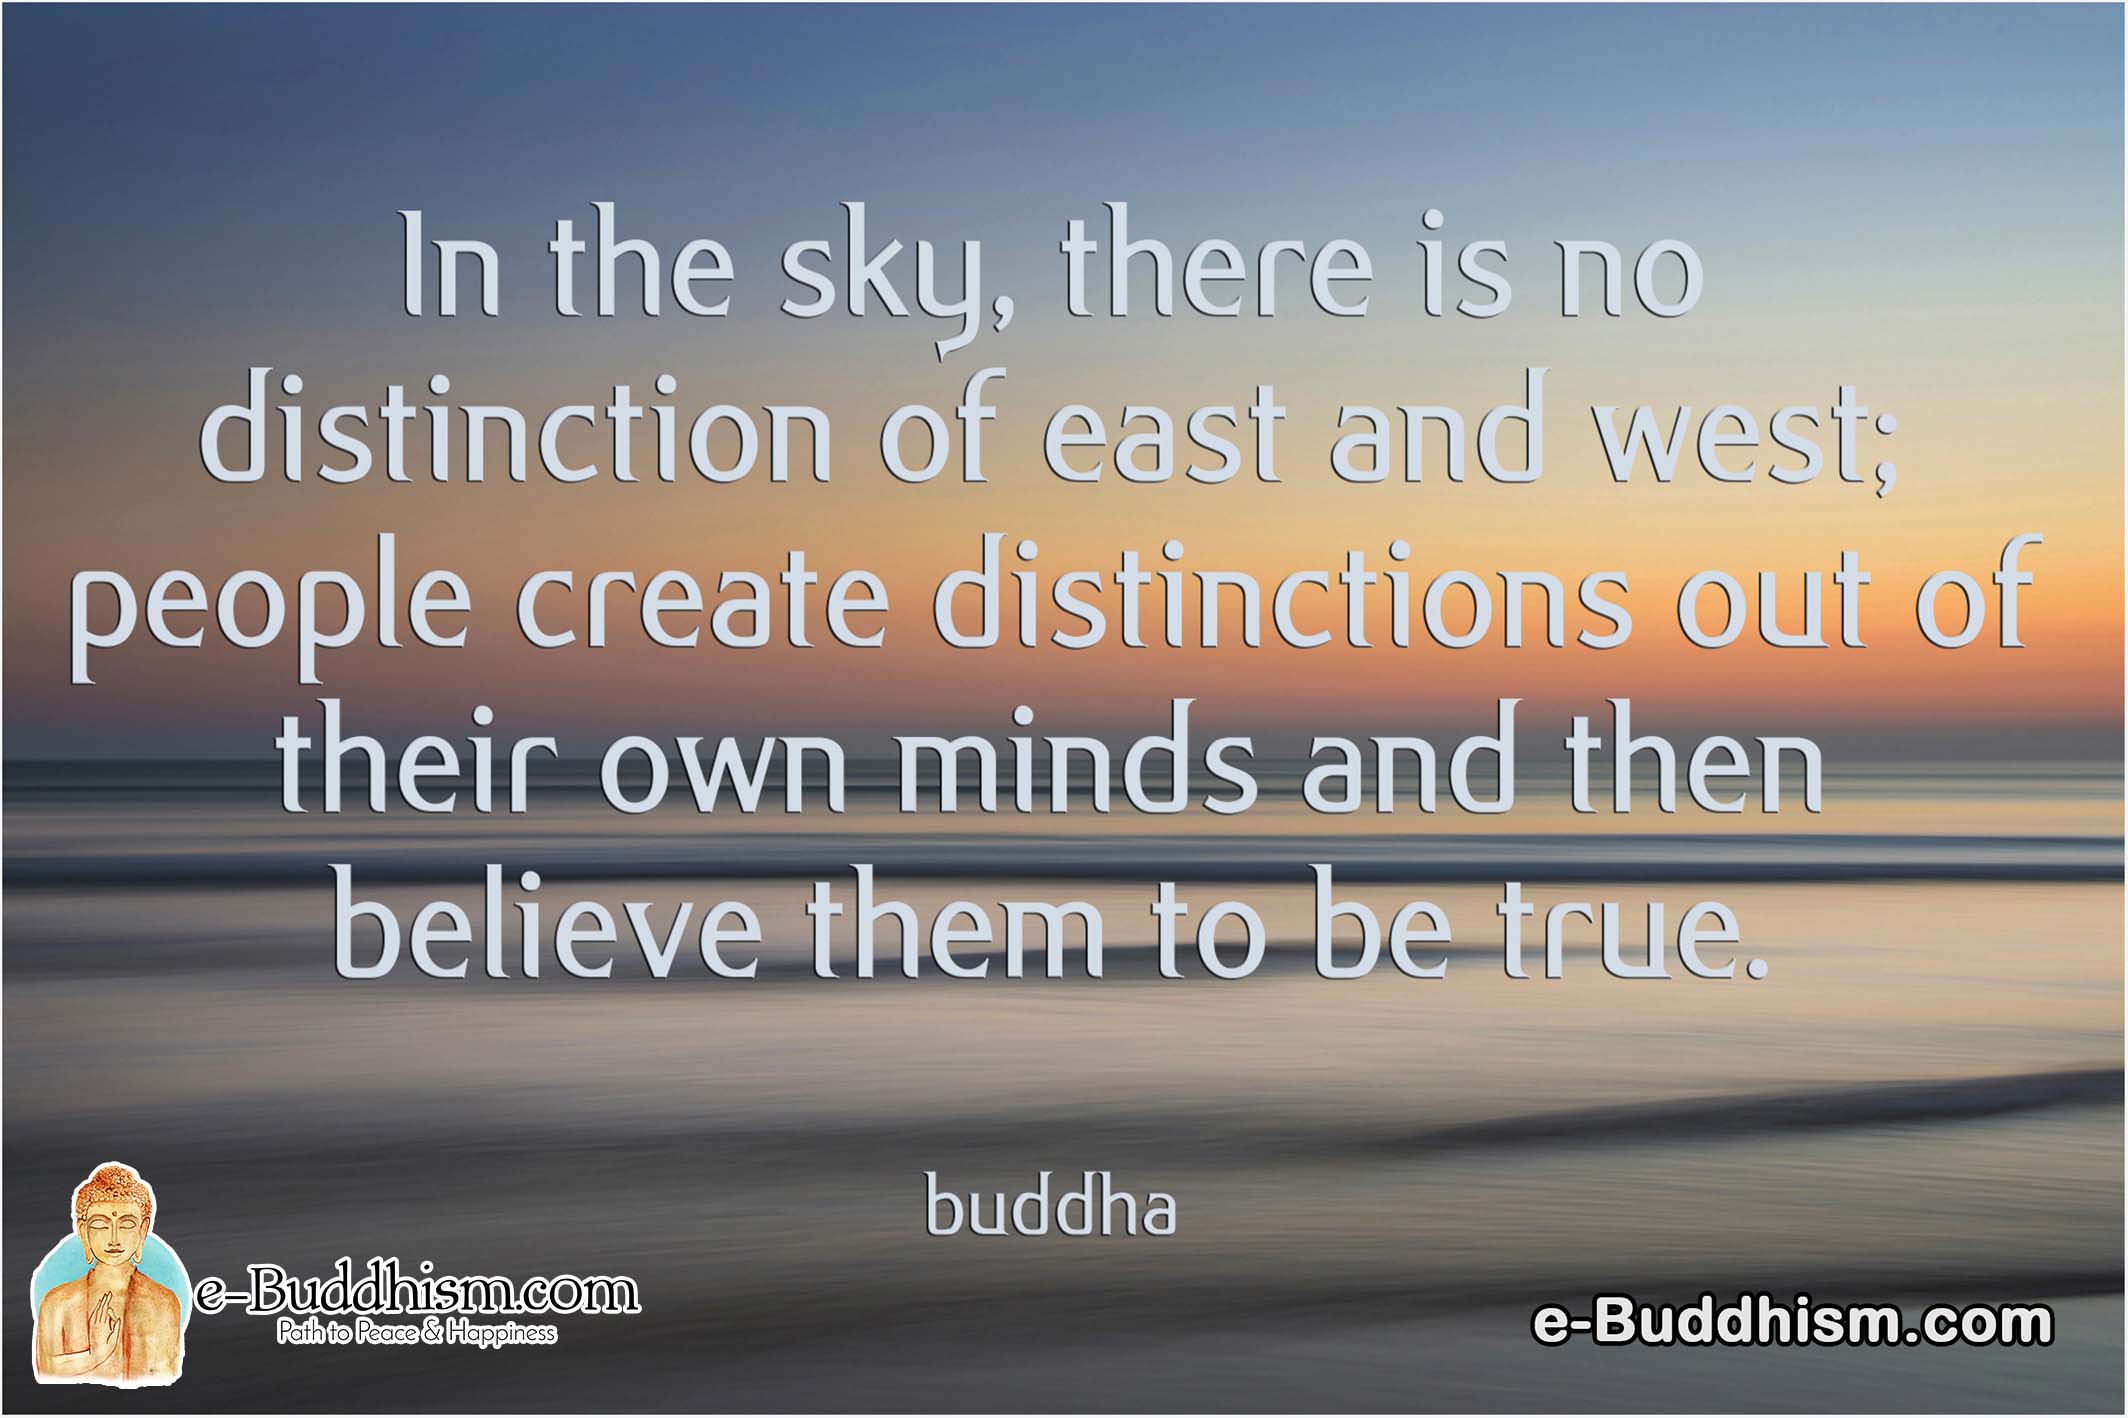 In the sky, there is no distinction between east and west; people create distinctions out of their own minds and then believe them to be true. -Buddha